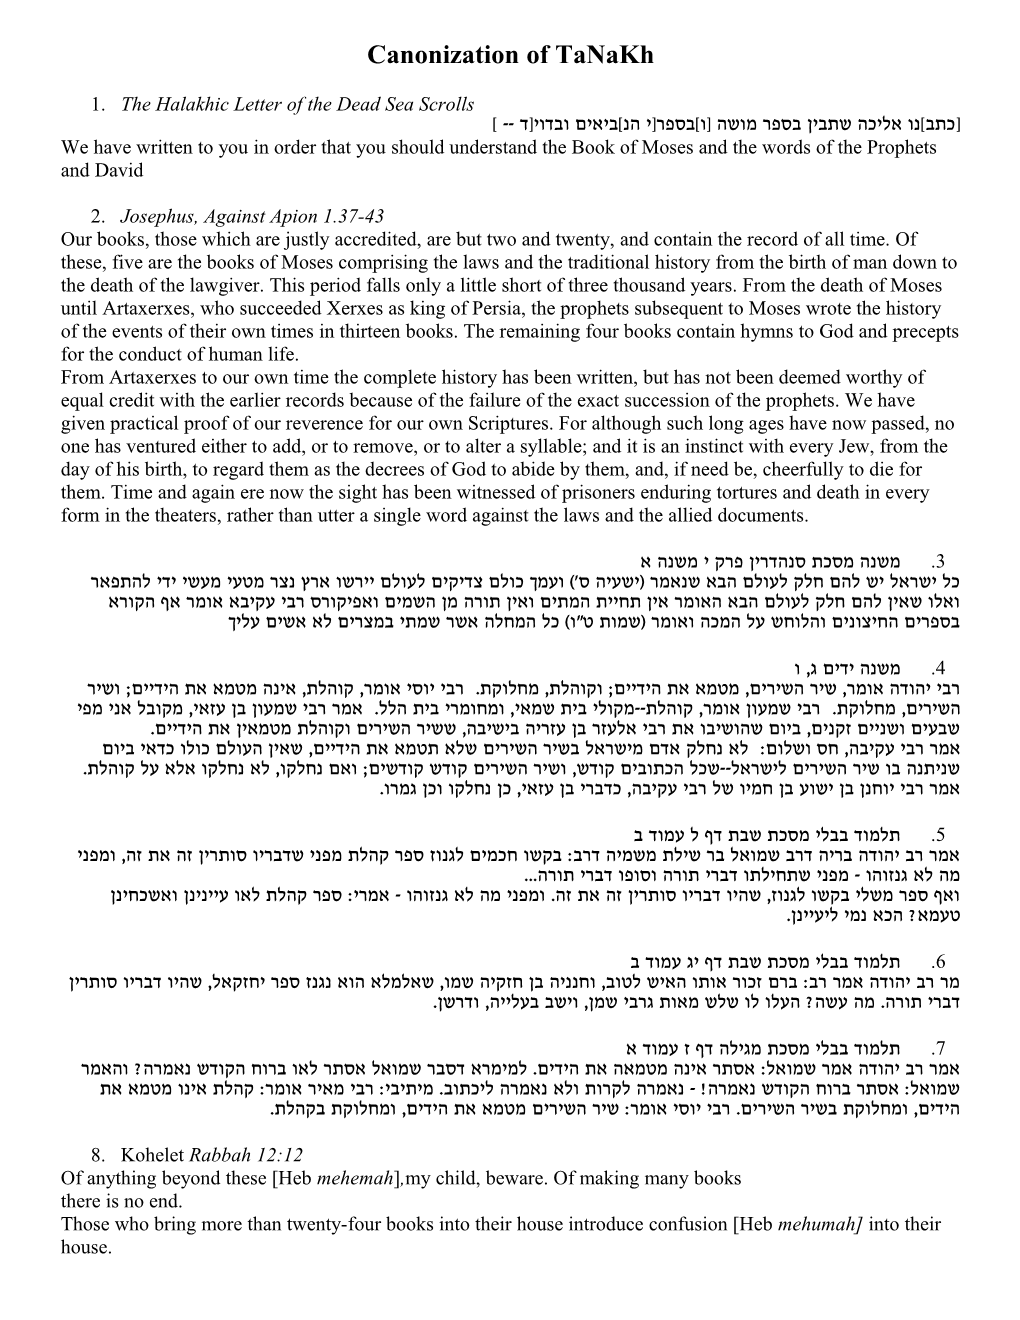 1. the Halakhic Letter of the Dead Sea Scrolls